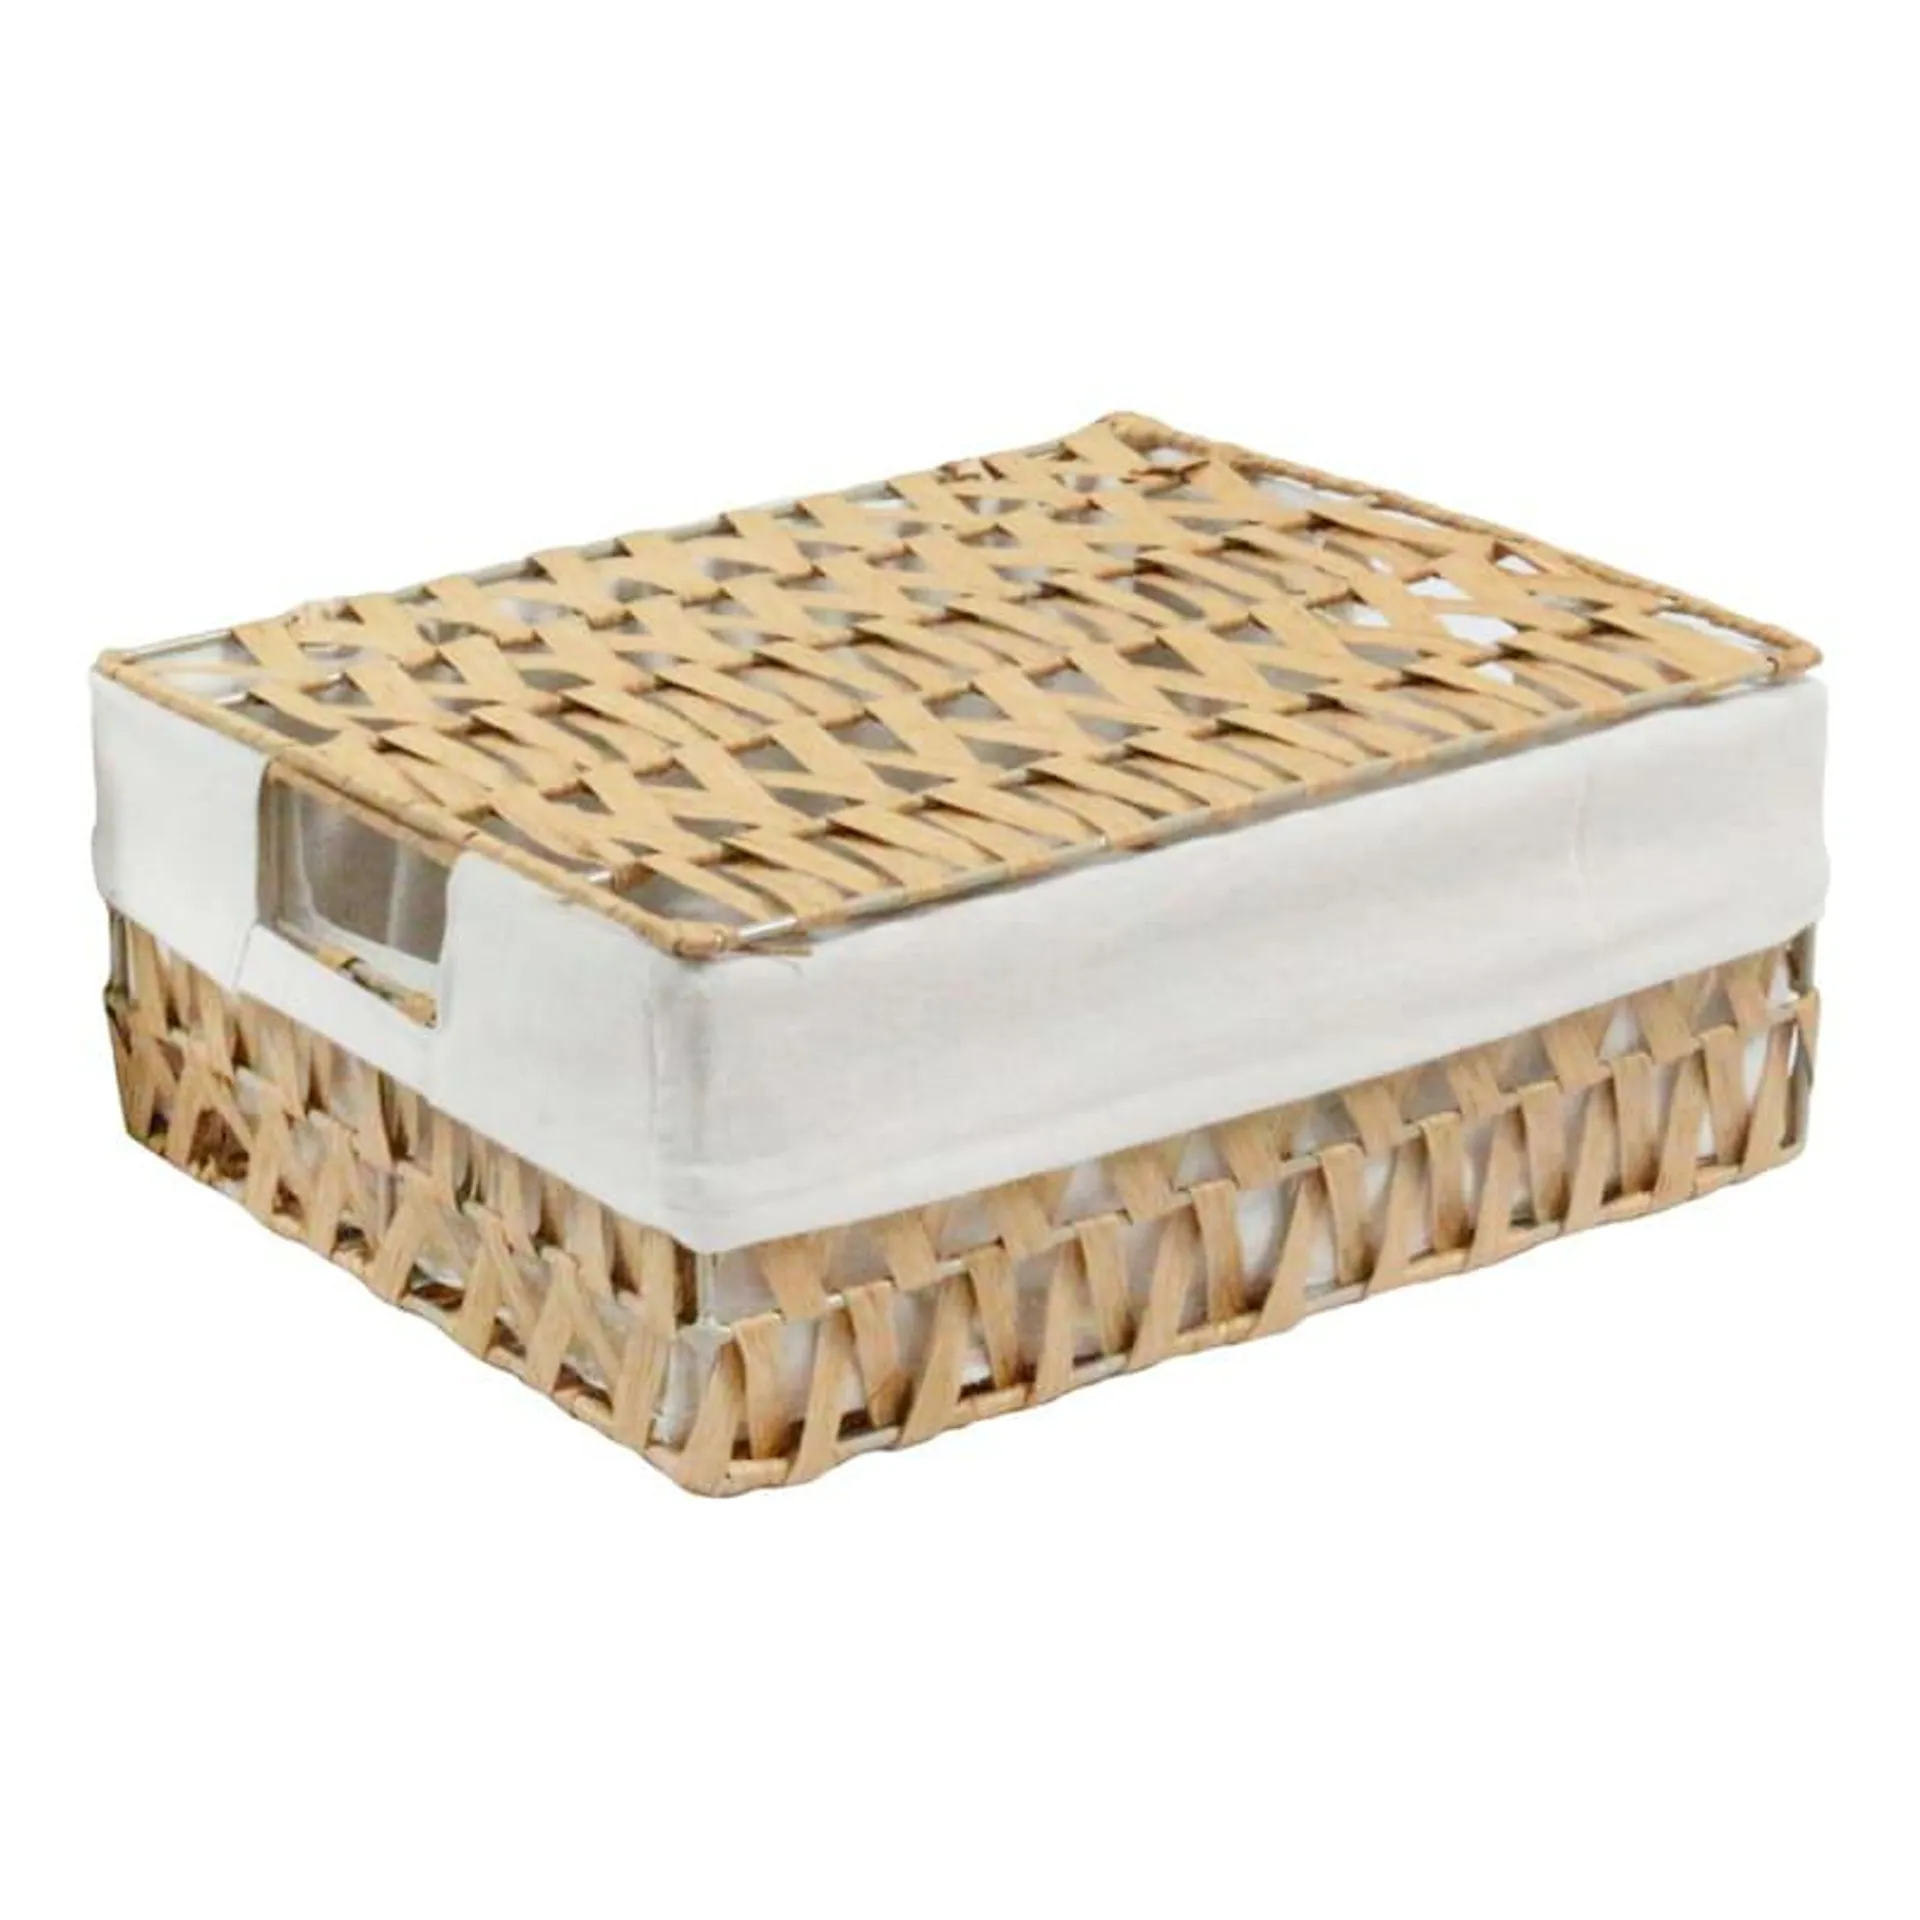 Chevy Natural Rectangle Storage Basket with Lid, Medium